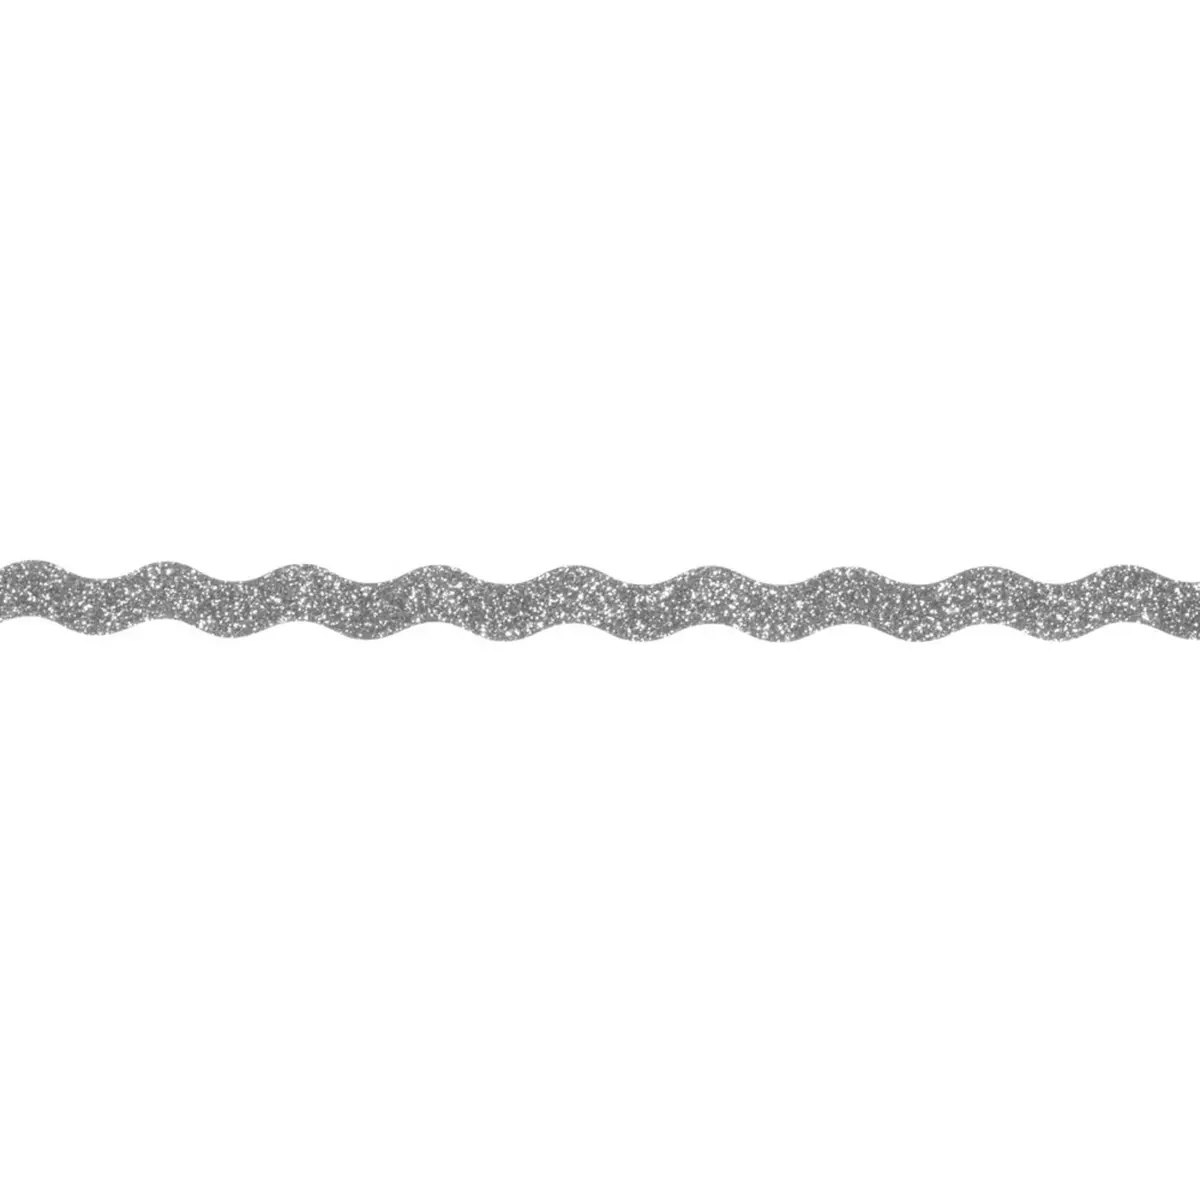 Rayher Paillettes Tape Wave, argent, 15mm, Rouleau 5m